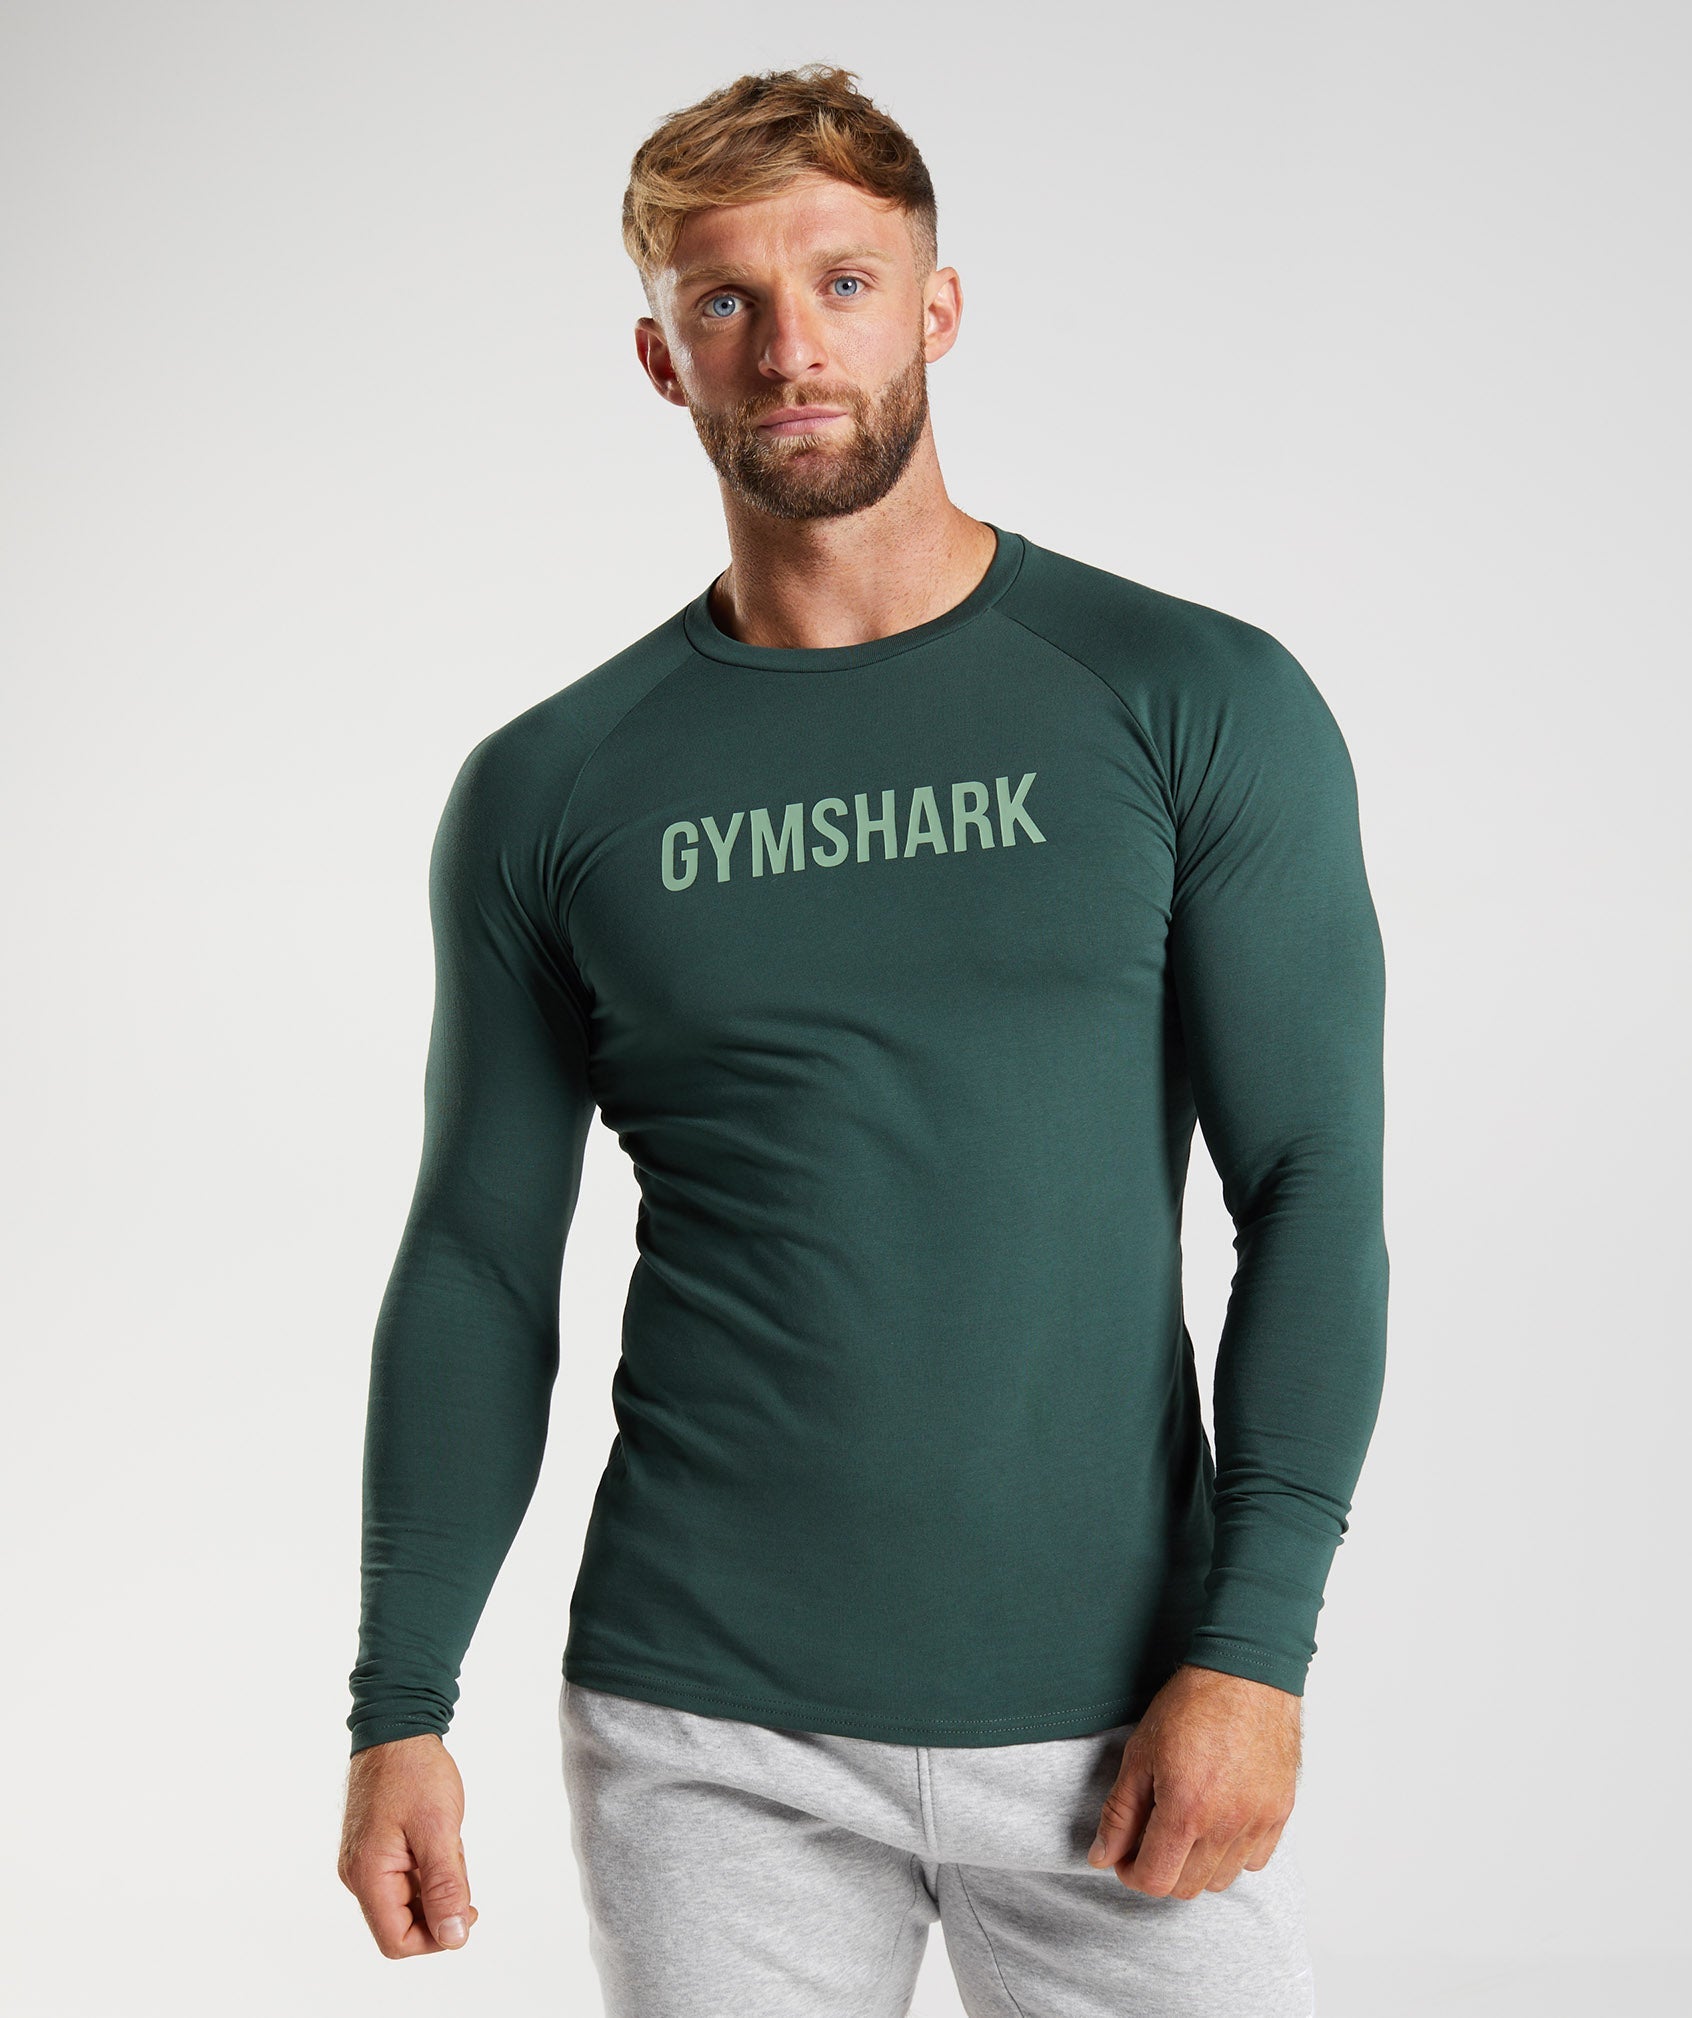 Apollo Long Sleeve T-Shirt in Obsidian Green - view 1